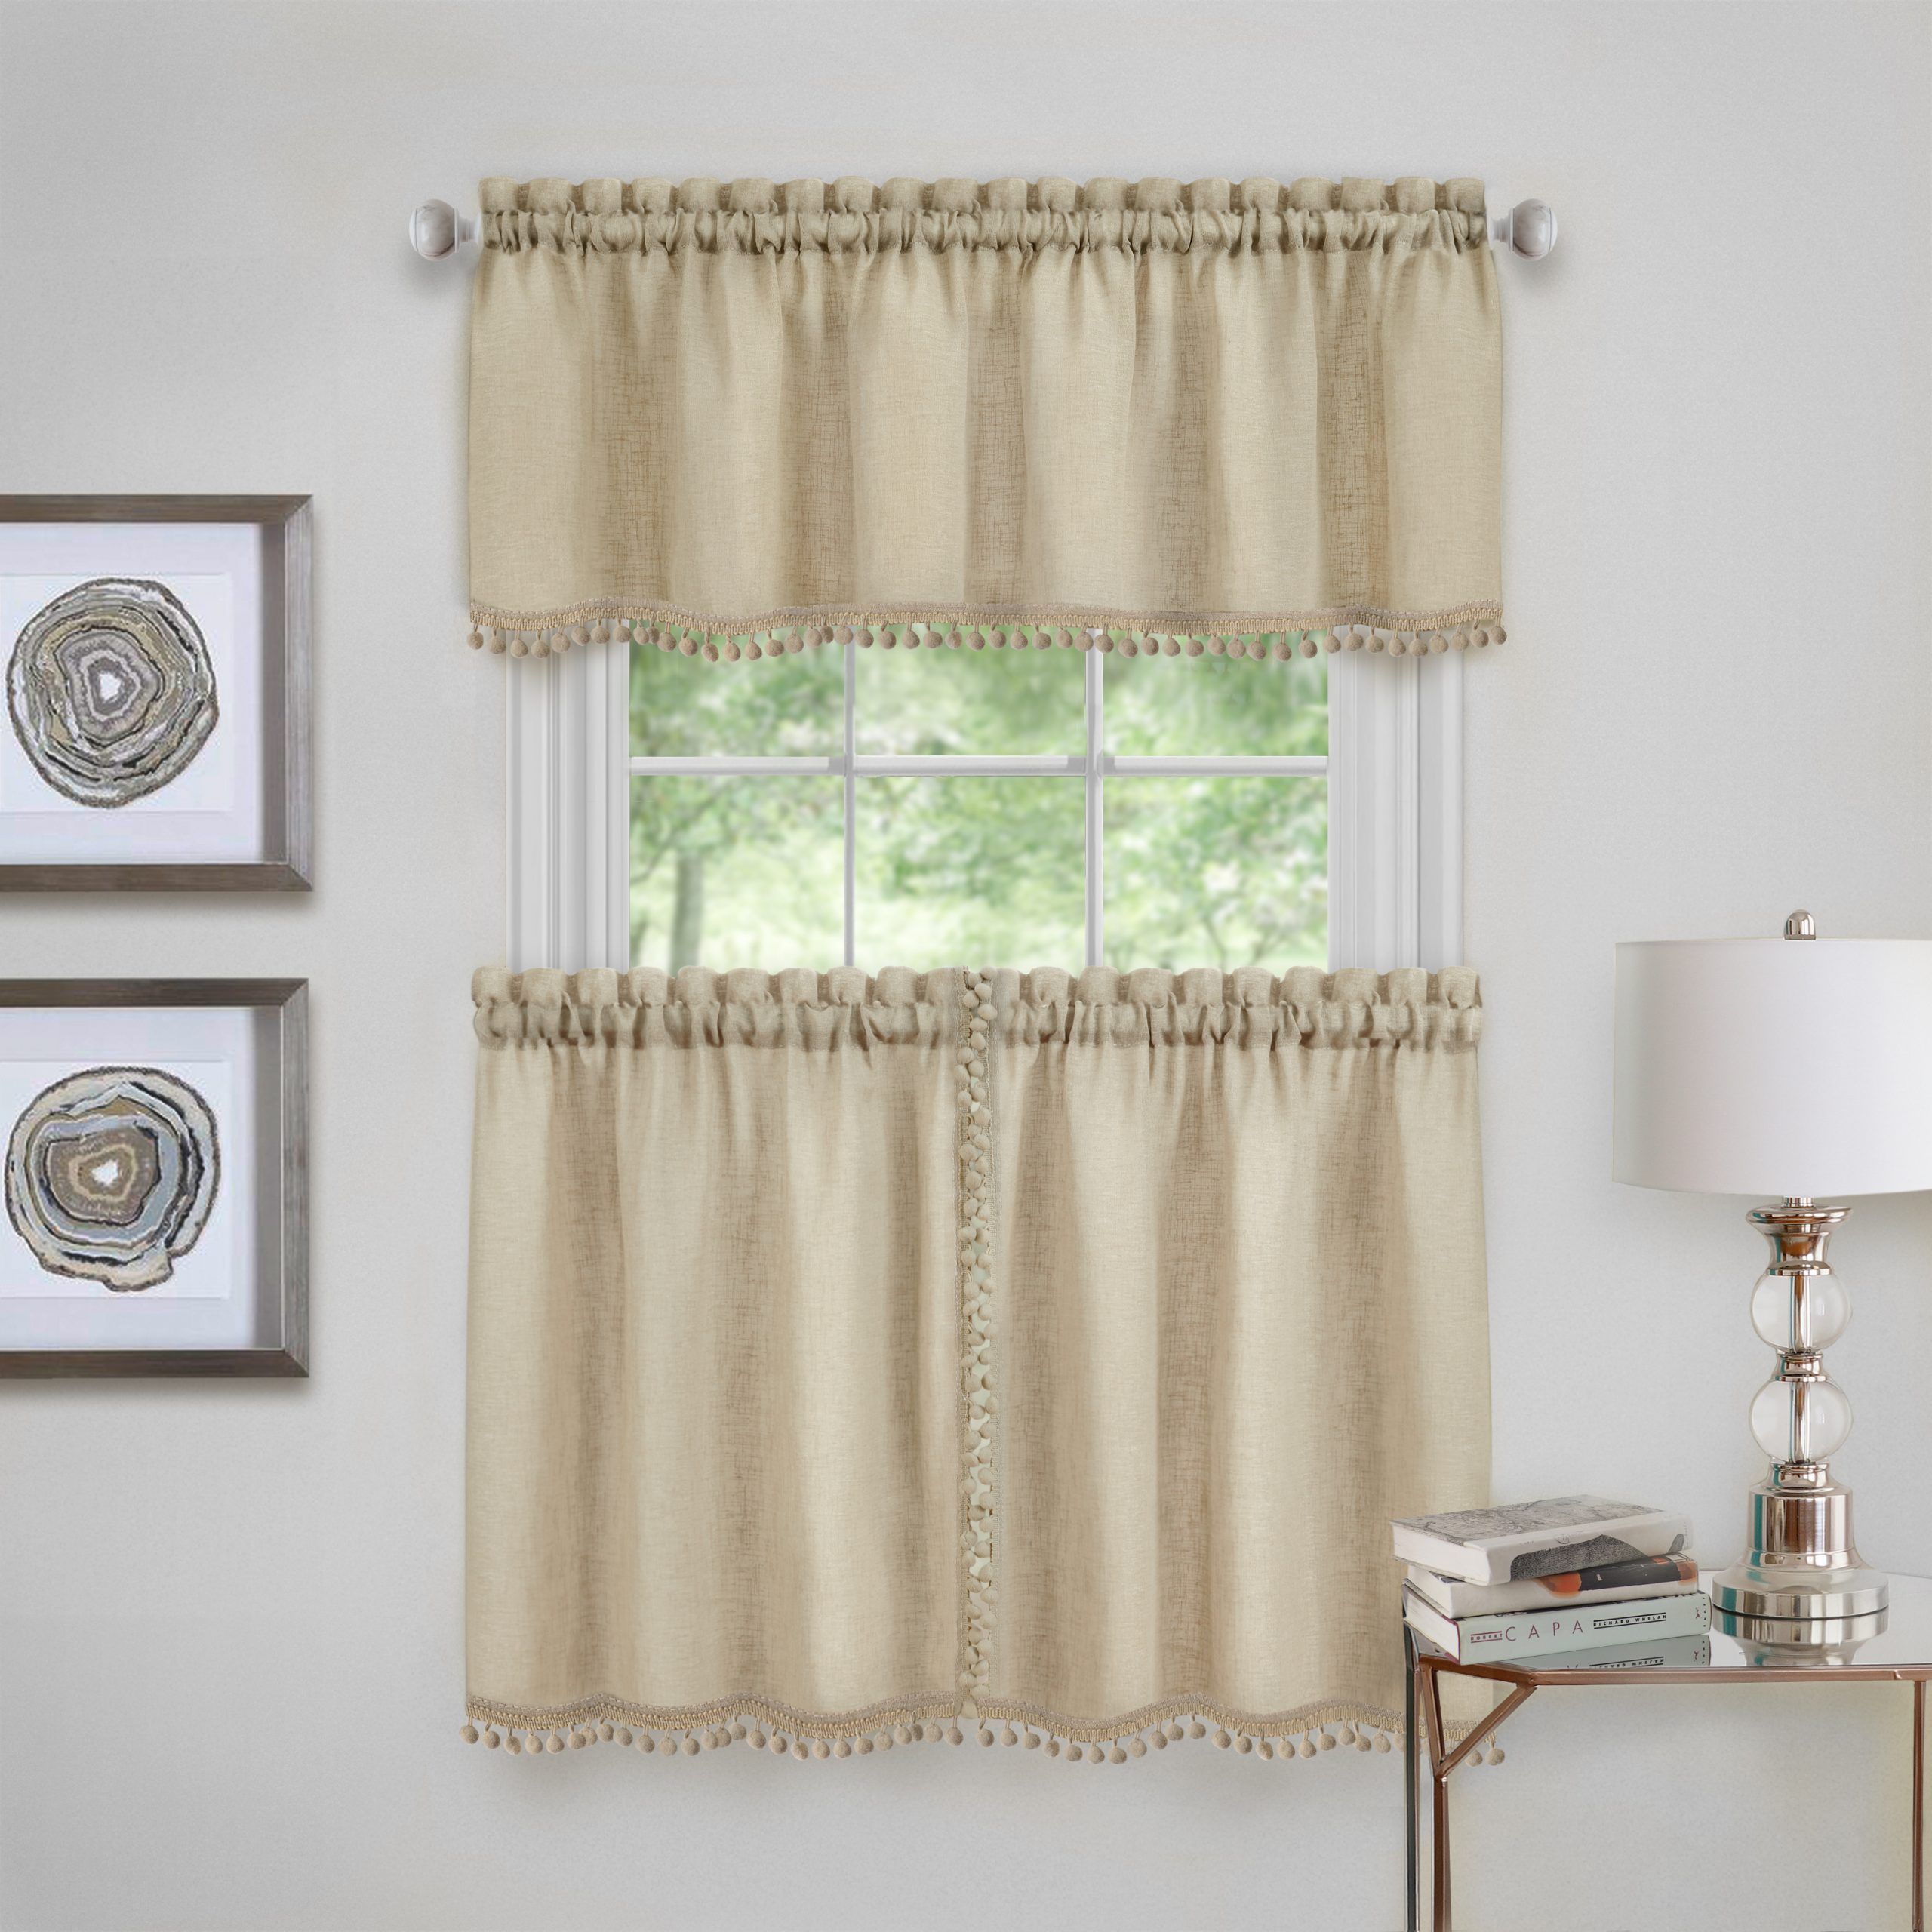 Achim Wallace Window Kitchen Curtain Tier Pair And Valance Set – 58x24 –  Linen Pertaining To Live, Love, Laugh Window Curtain Tier Pair And Valance Sets (View 8 of 20)